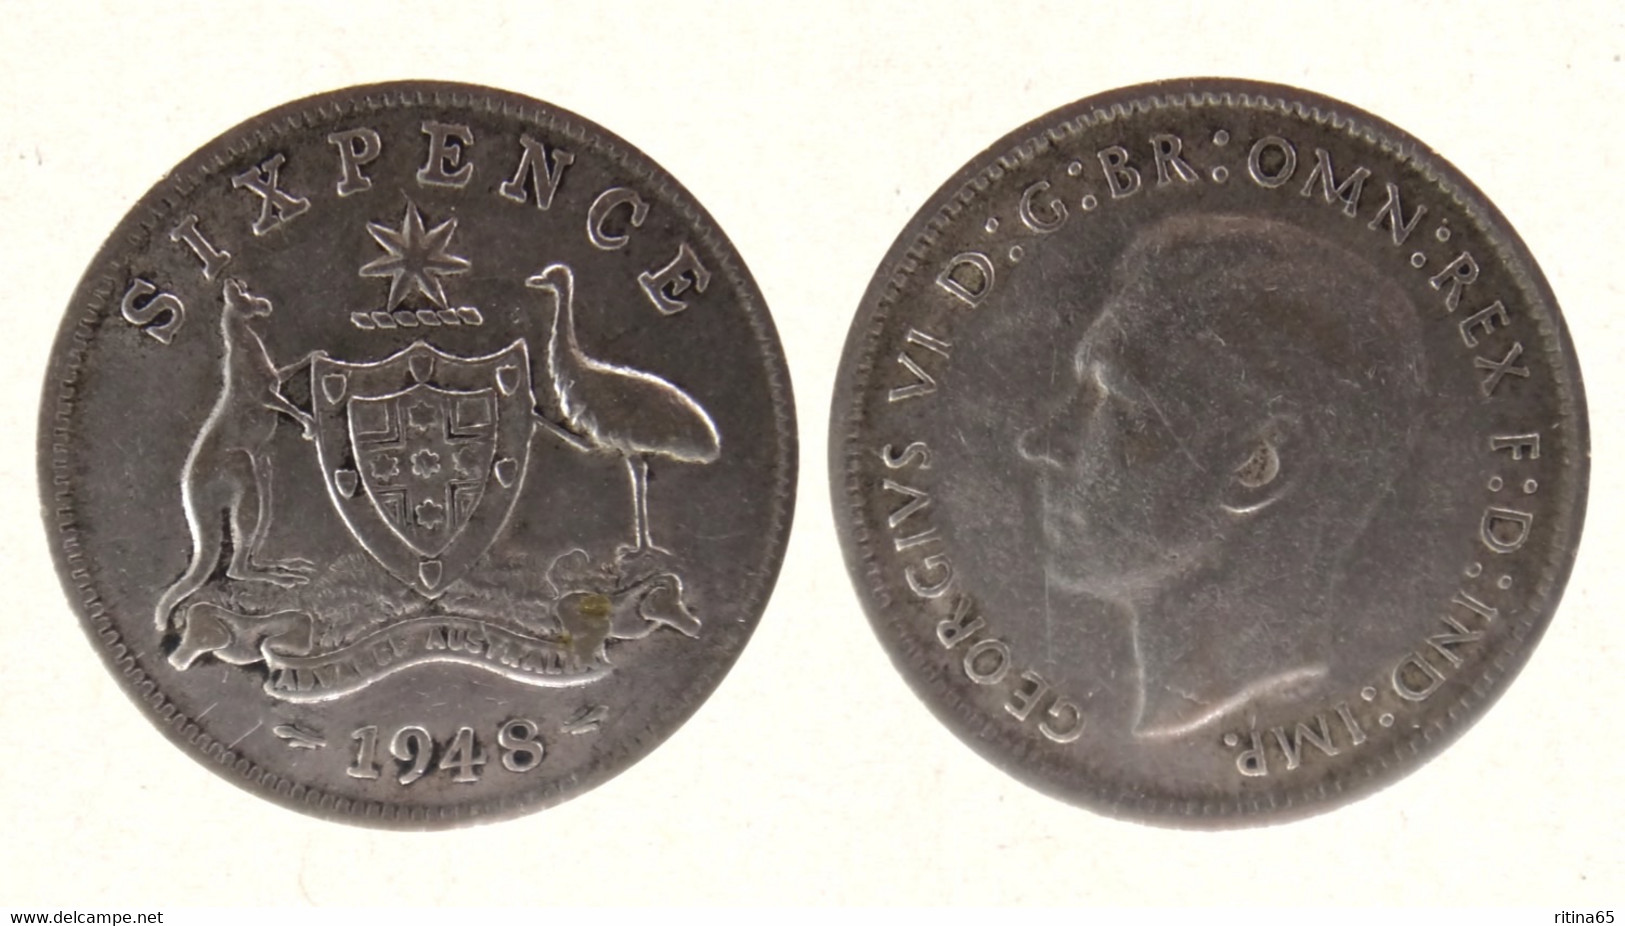 AUSTRALIA 6 PENCE 1948 IN ARGENTO - Sixpence